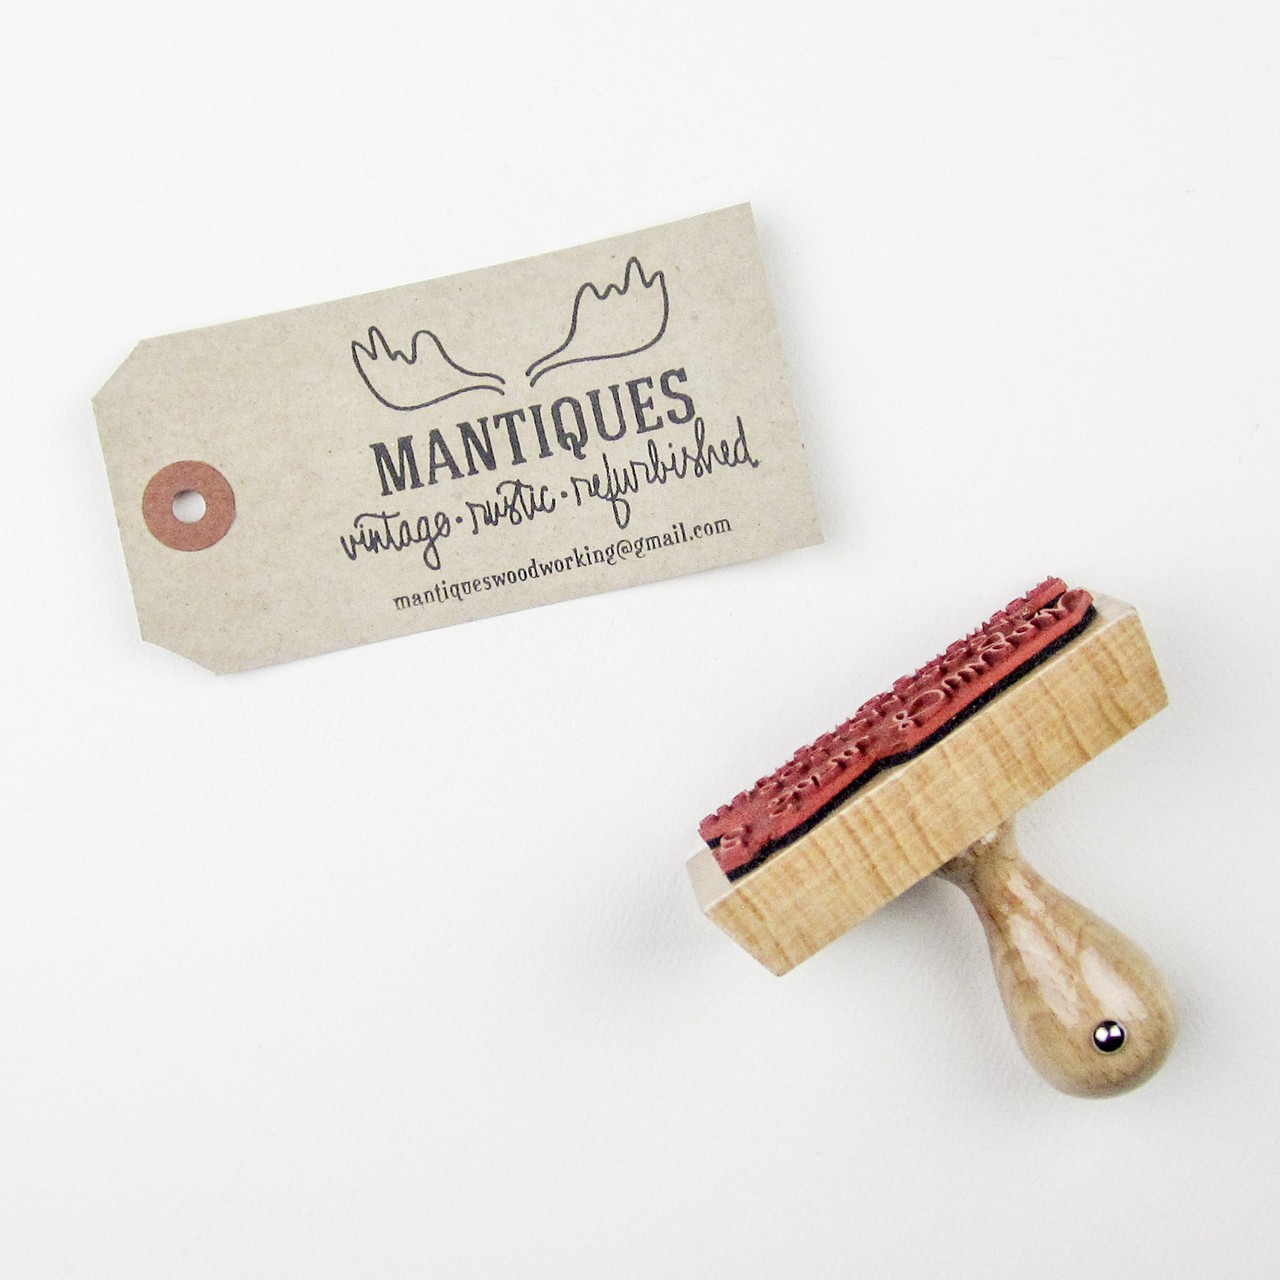 Typeset Business Card Stamp by Paper Sushi